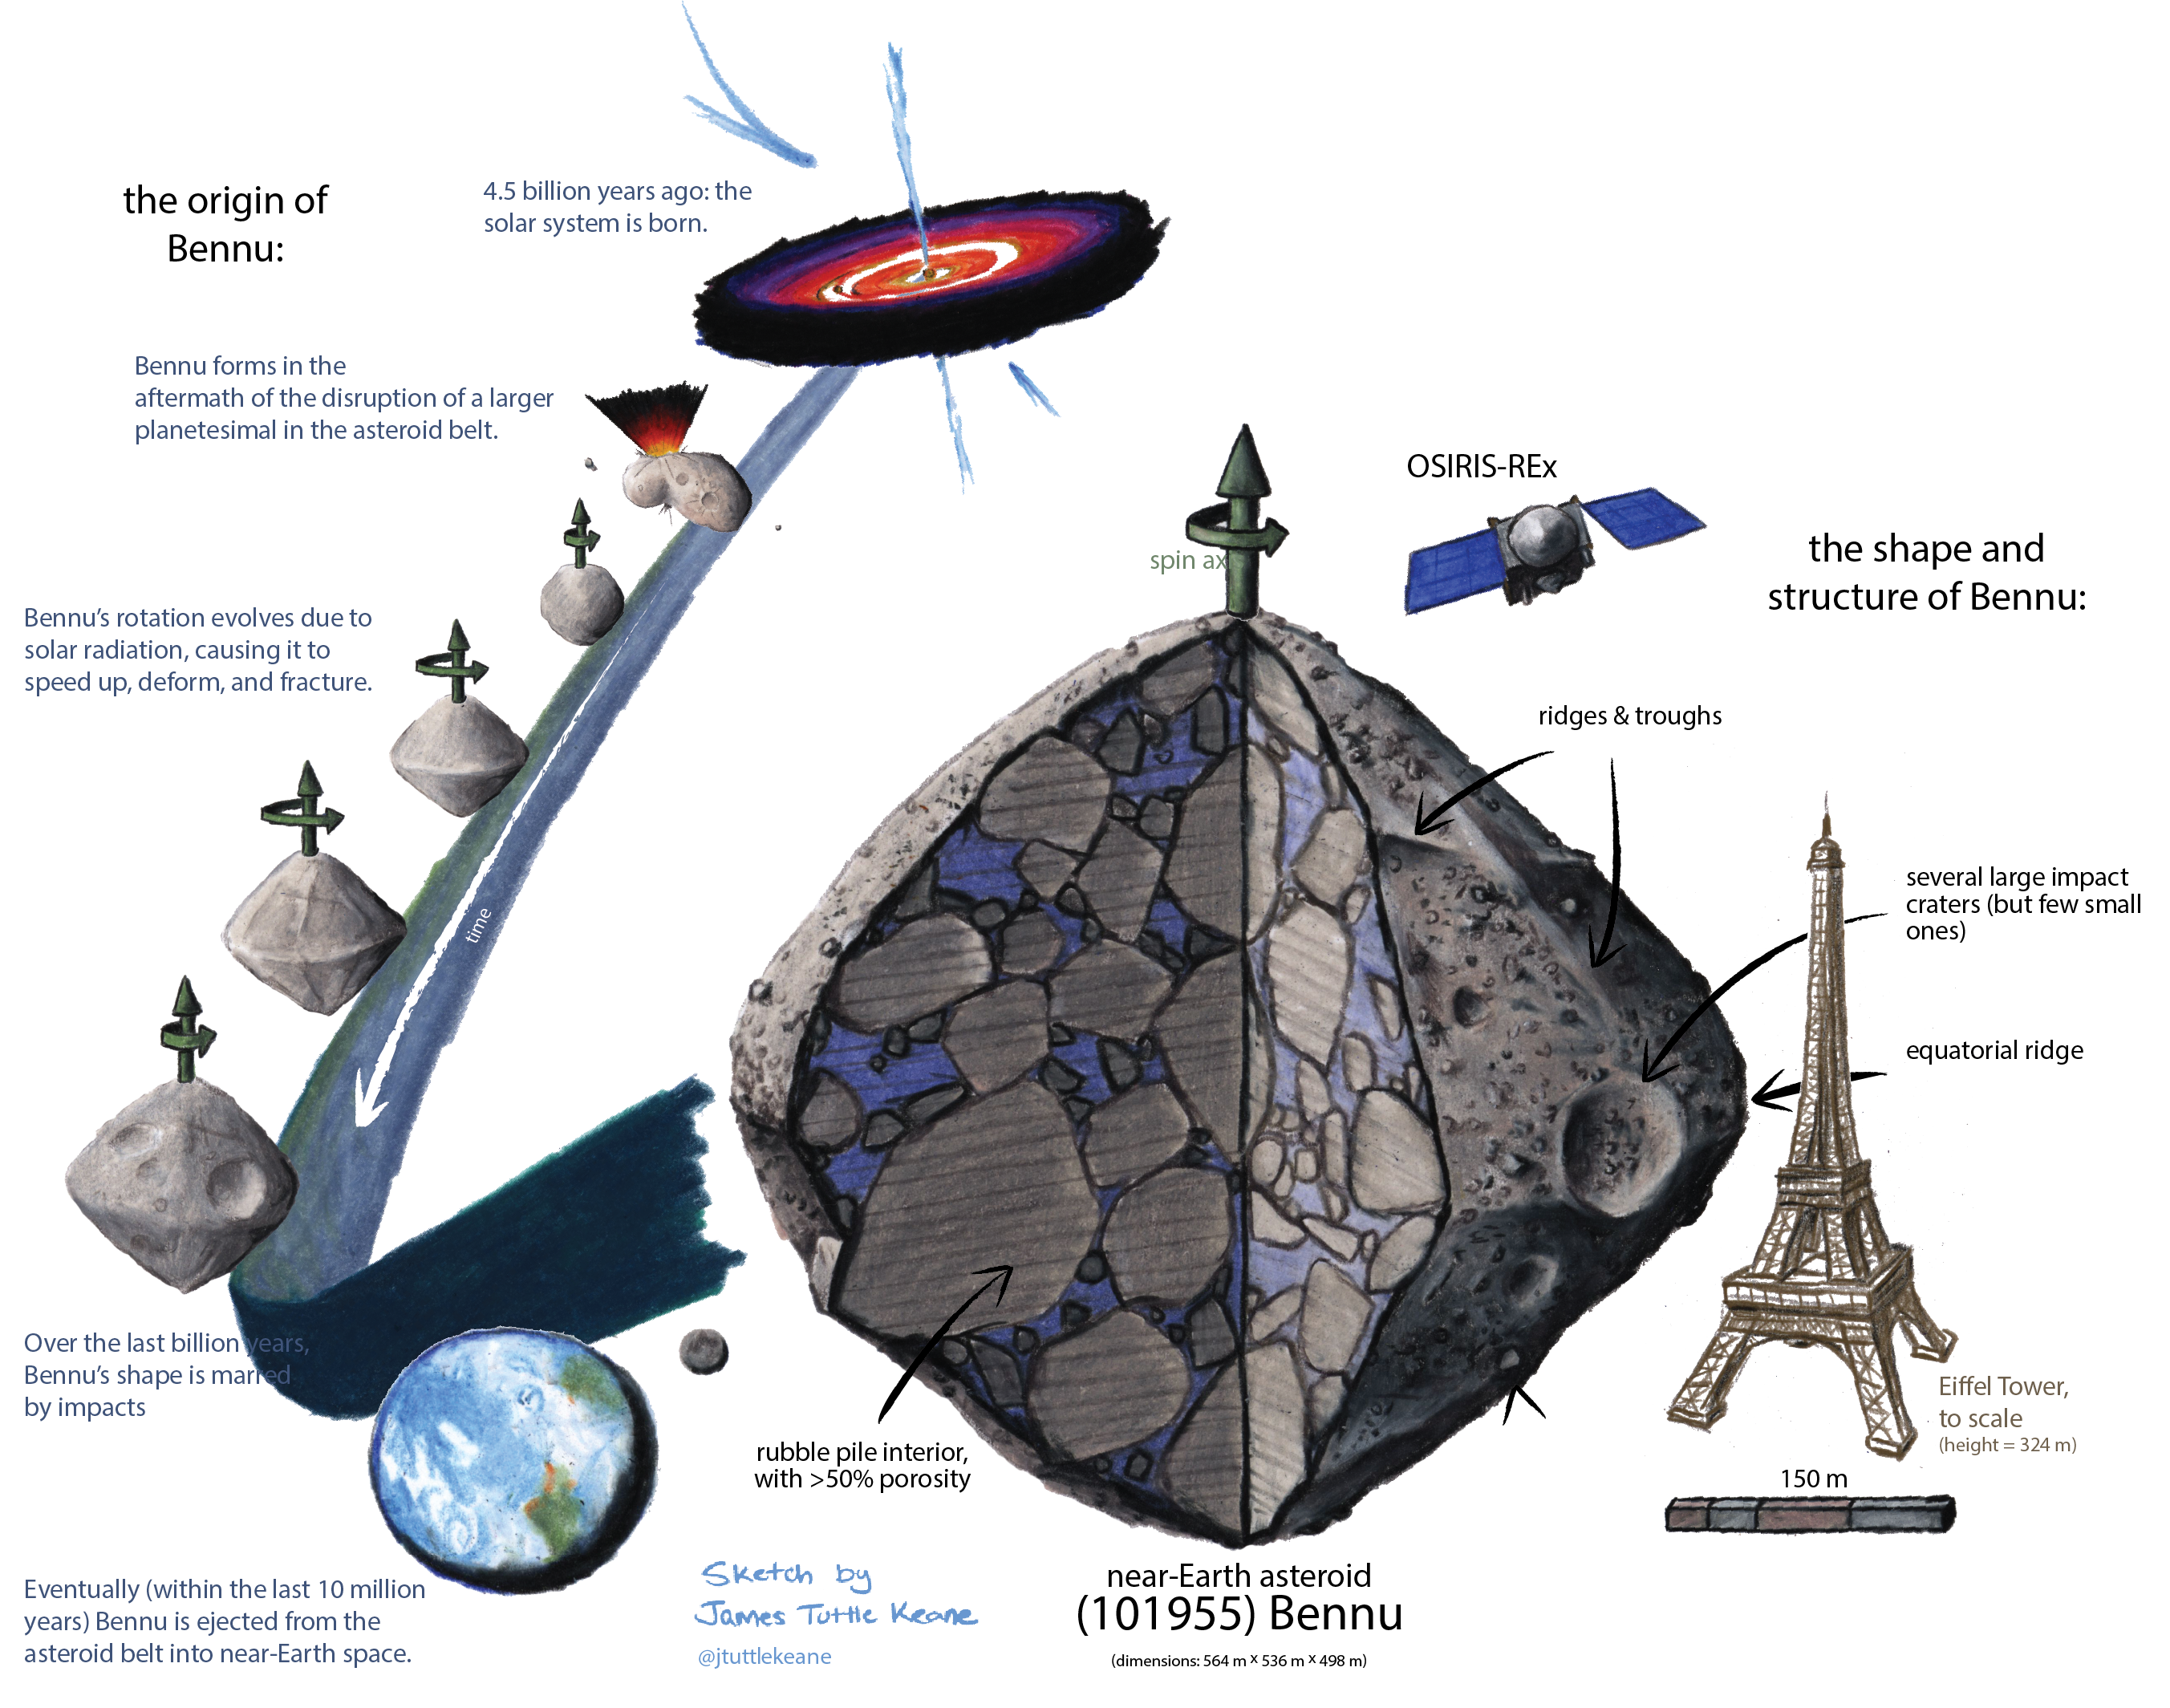 An illustration showing the asteroid, Bennu, with cross section showing interior, comparison to the Eiffel Tower. To the left is a schematic showing the evolution of Bennu over time with increasing spin.